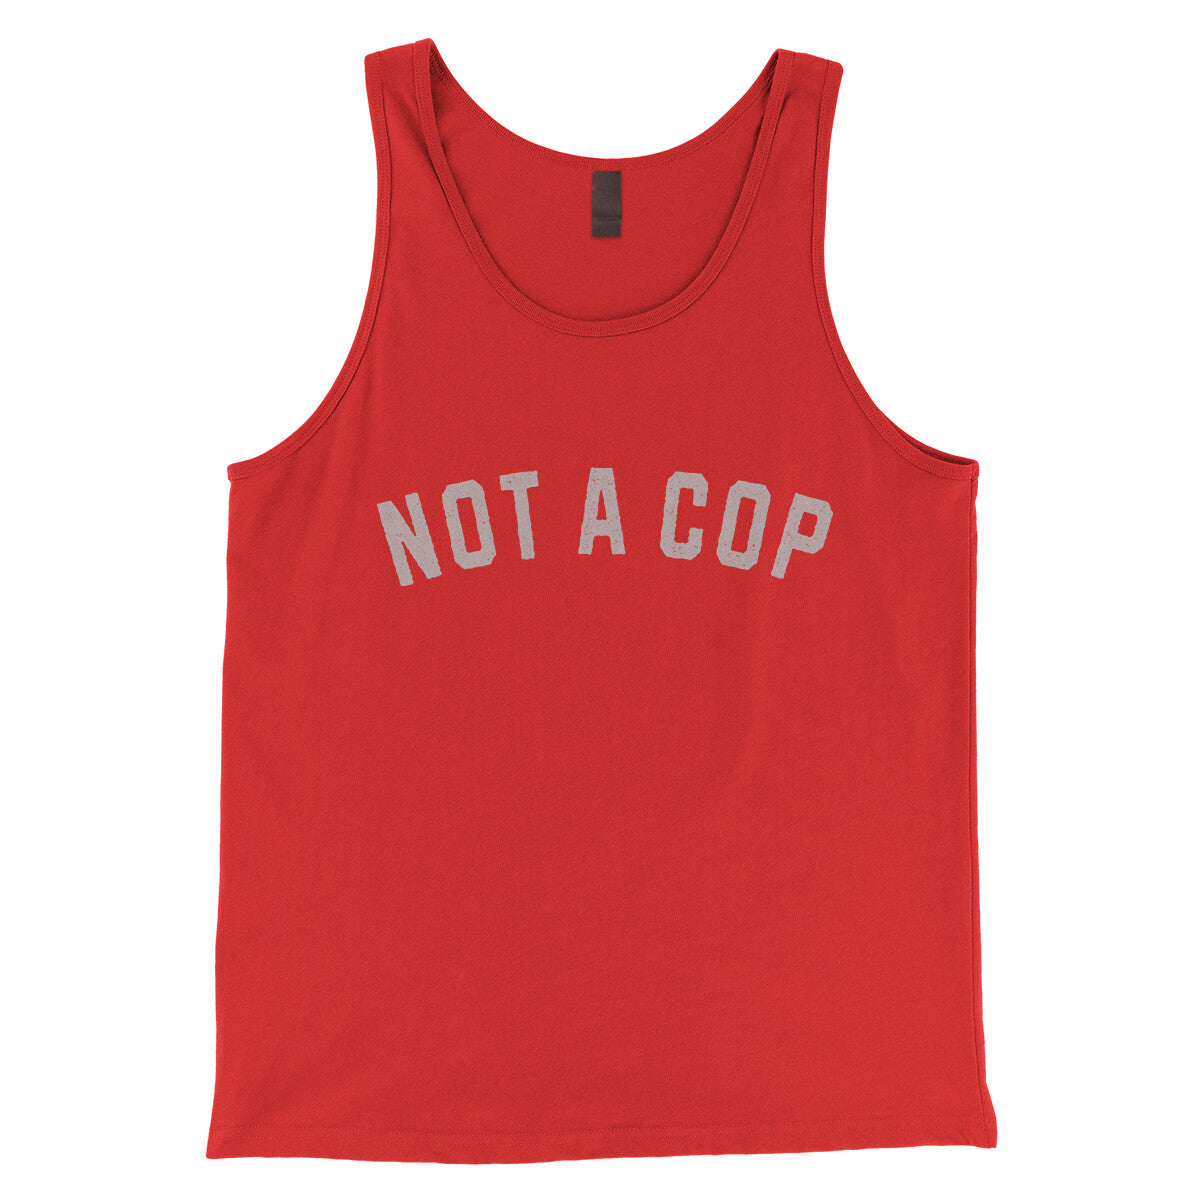 Not a Cop in Red Color